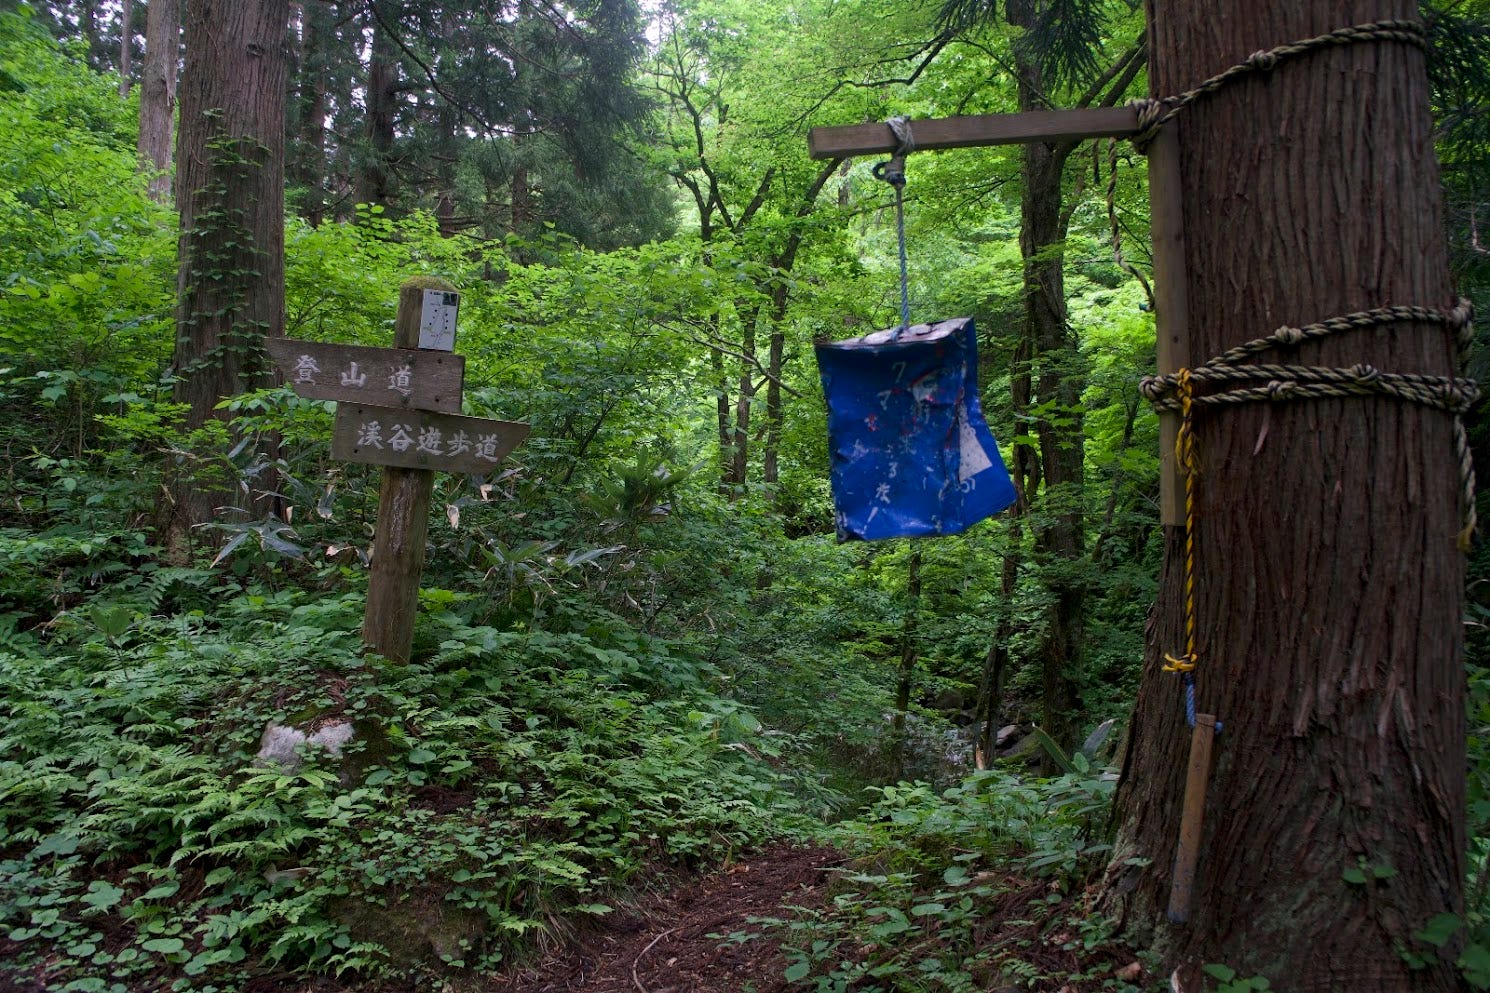 In the middle of a green forest, a big blue tin can attached to a tree and a wooden stick used to hit the tin to ward off bears. To the left there is a sign pointing to the mountain trails.